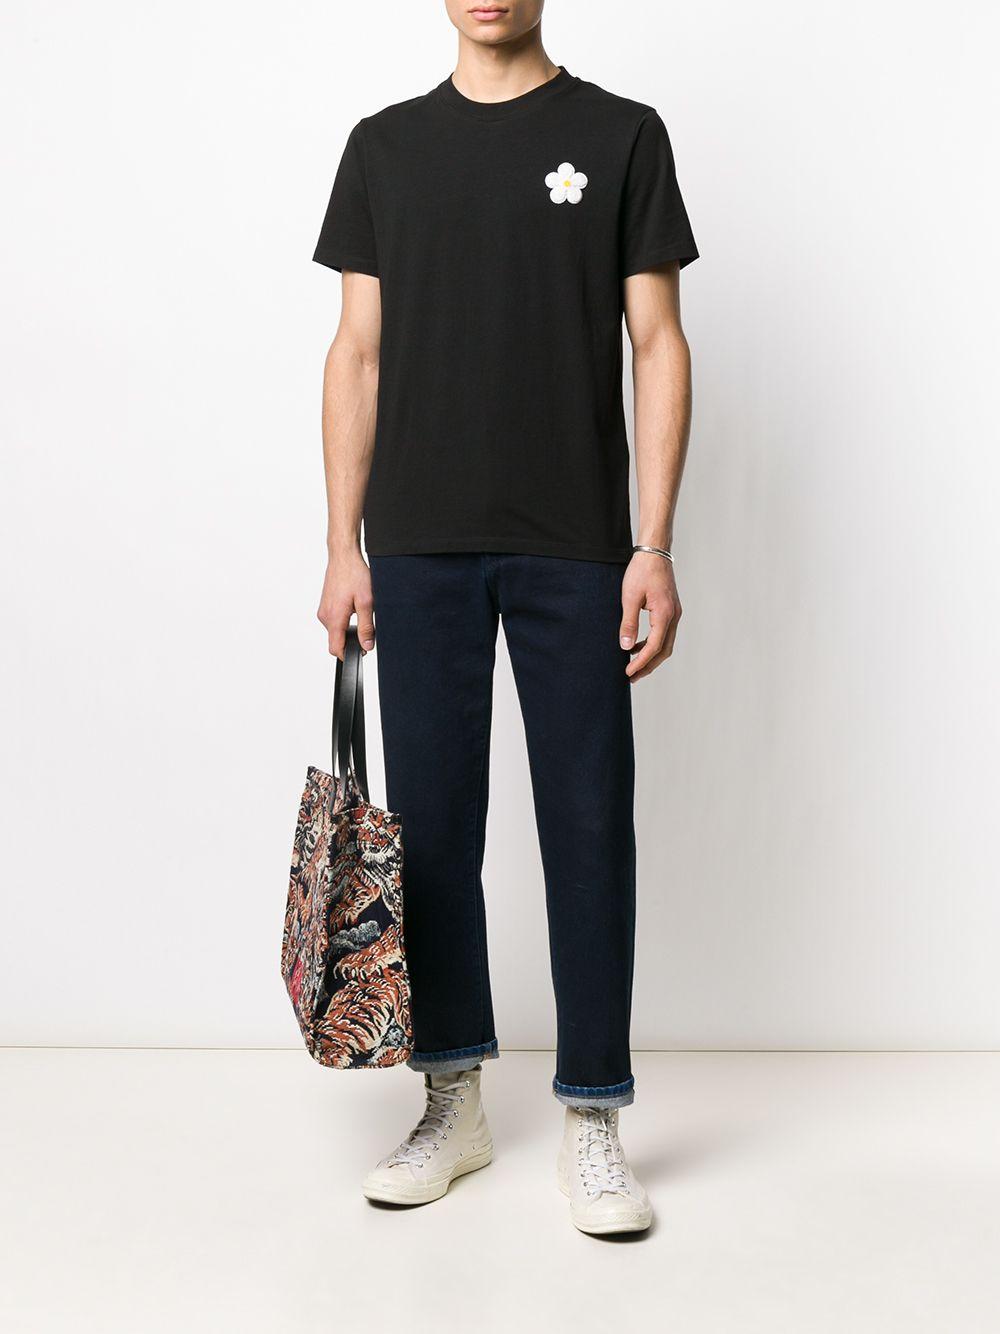 Sandro Floral Embroidered T-shirt in Black for Men | Lyst